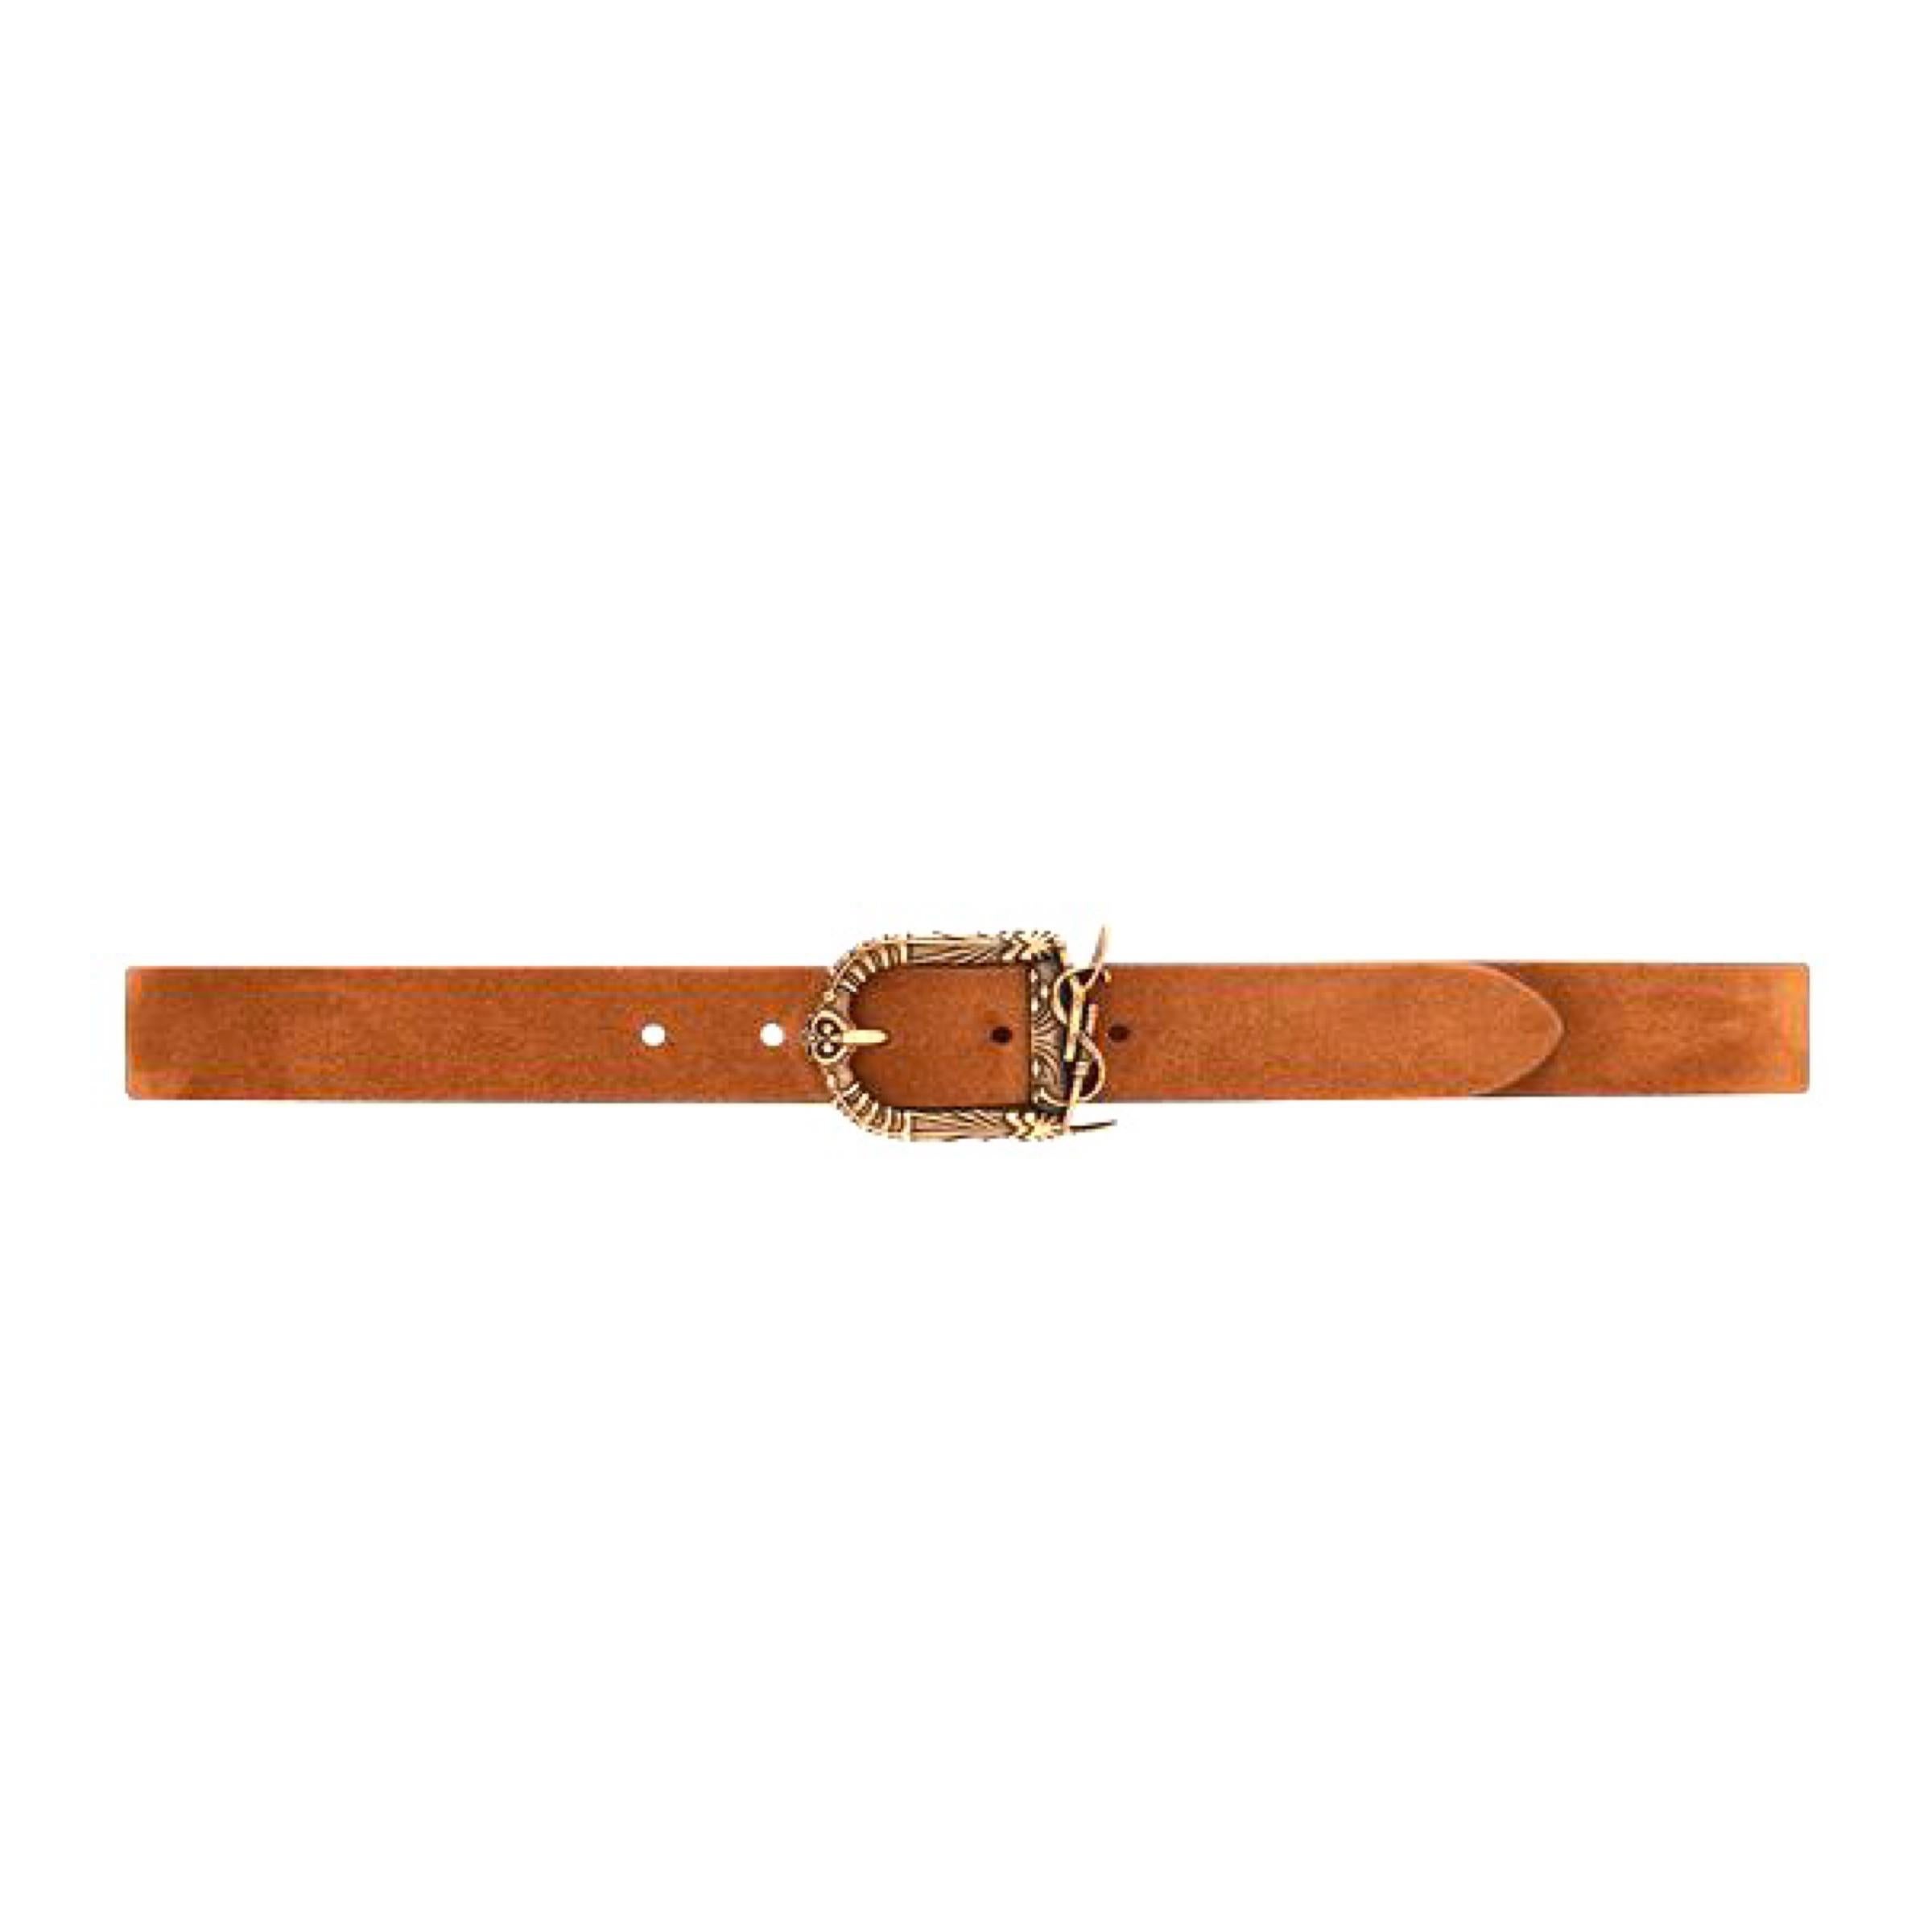 New Saint Laurent Brown Decorative Buckle Leather Belt Size 26 US 65 EU

Authenticity Guaranteed

DETAILS
Brand: Saint Laurent
Condition: Brand new
Gender: Women
Category: Belt
Color: Brown
Material: Leather
Front YSL logo
Decorative buckle
Made in